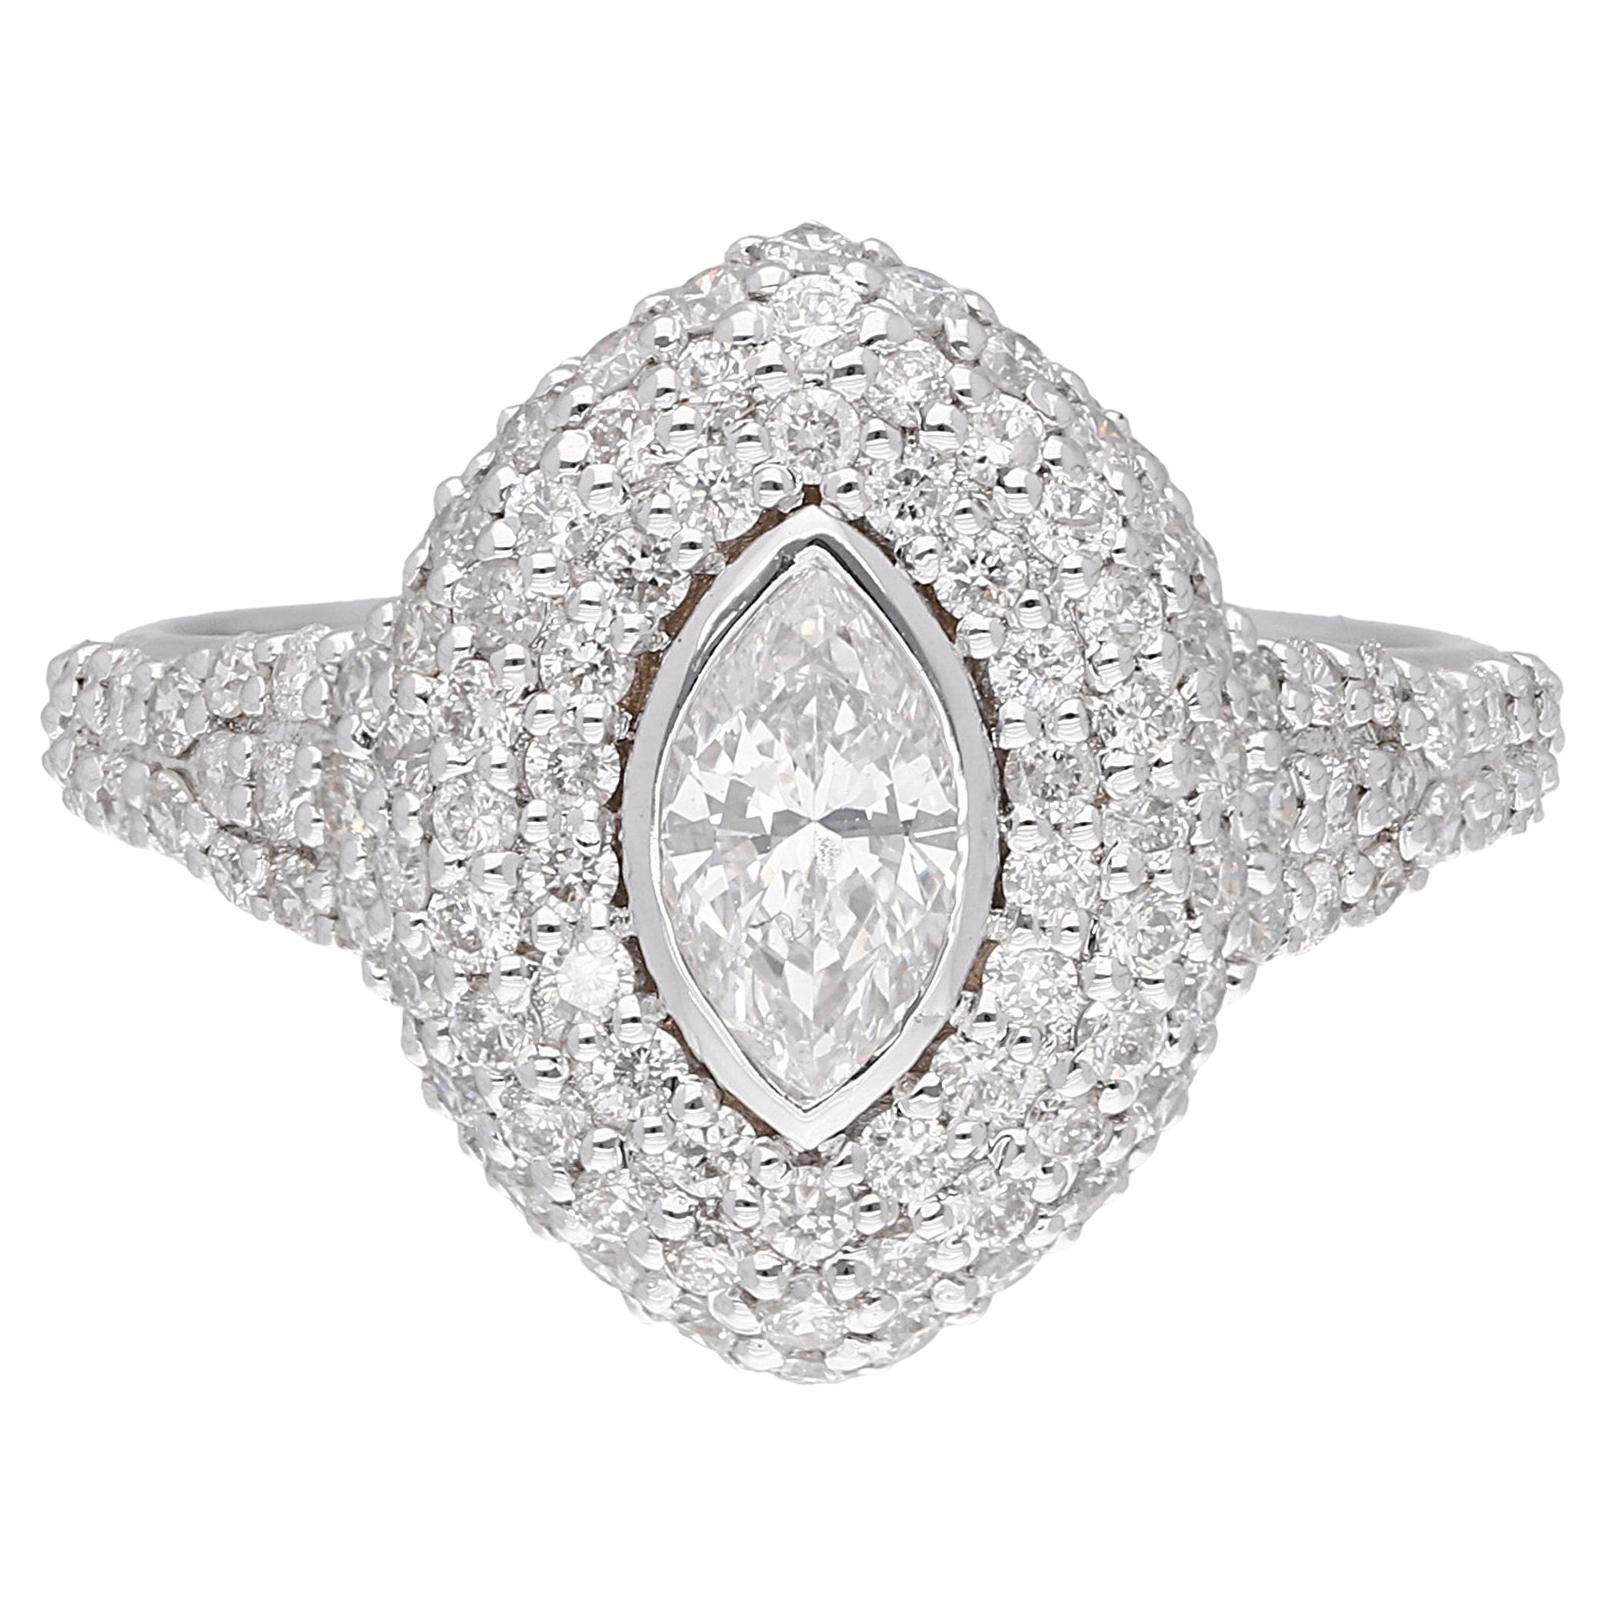 1.73 Carat SI Clarity HI Color Marquise Round Diamond Ring 14 Karat White Gold For Sale